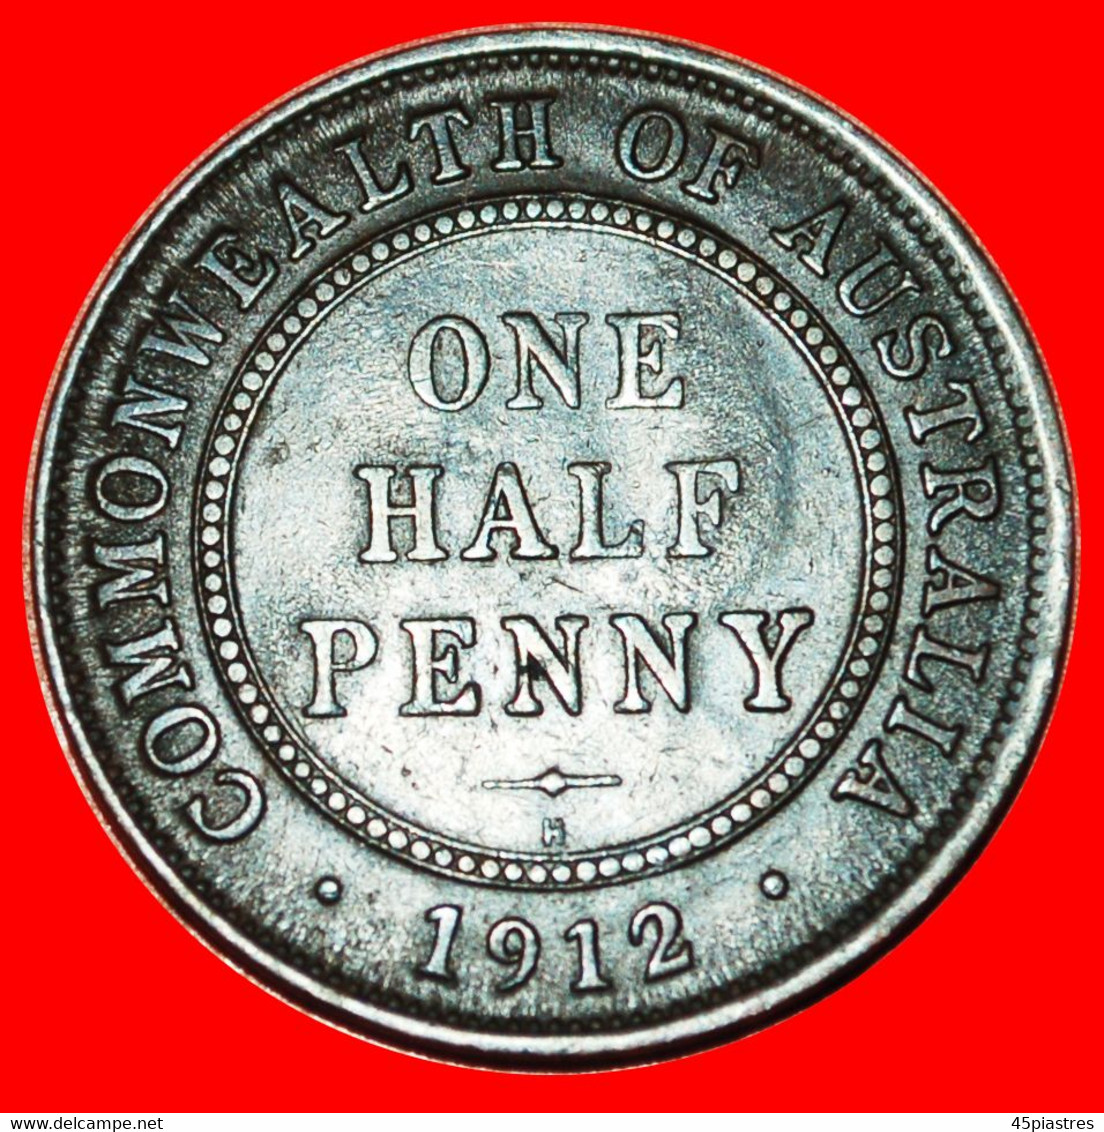 * GREAT BRITAIN: AUSTRALIA ★ 1/2 PENNY 1912H! GEORGE V (1911-1936)★LOW START ★ NO RESERVE! - ½ Penny